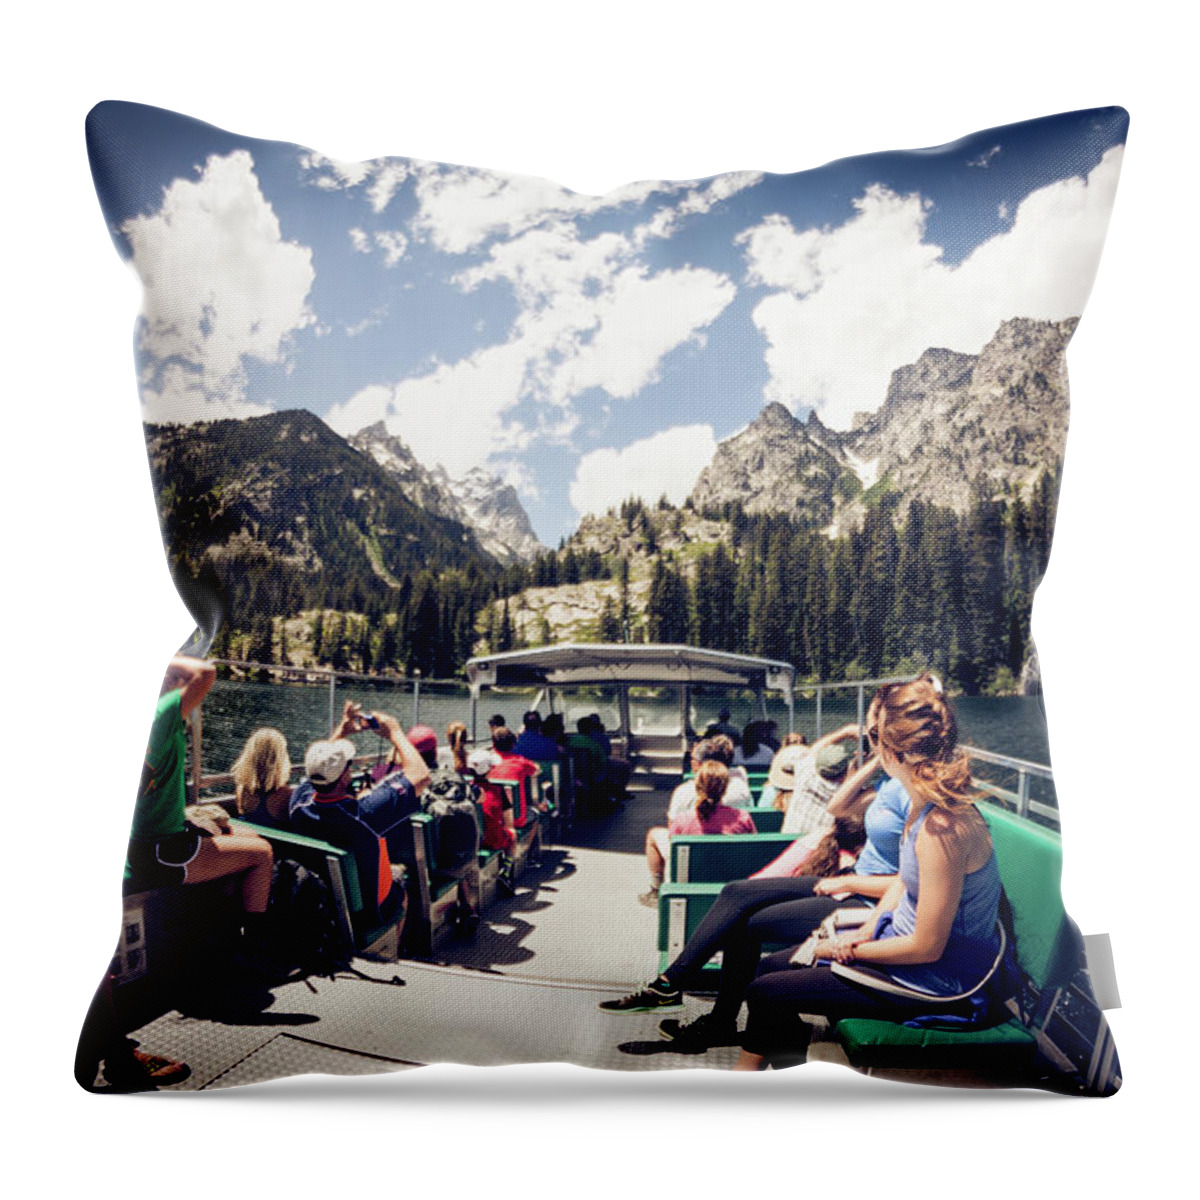 Tourist Throw Pillow featuring the photograph Look Out by Hyuntae Kim